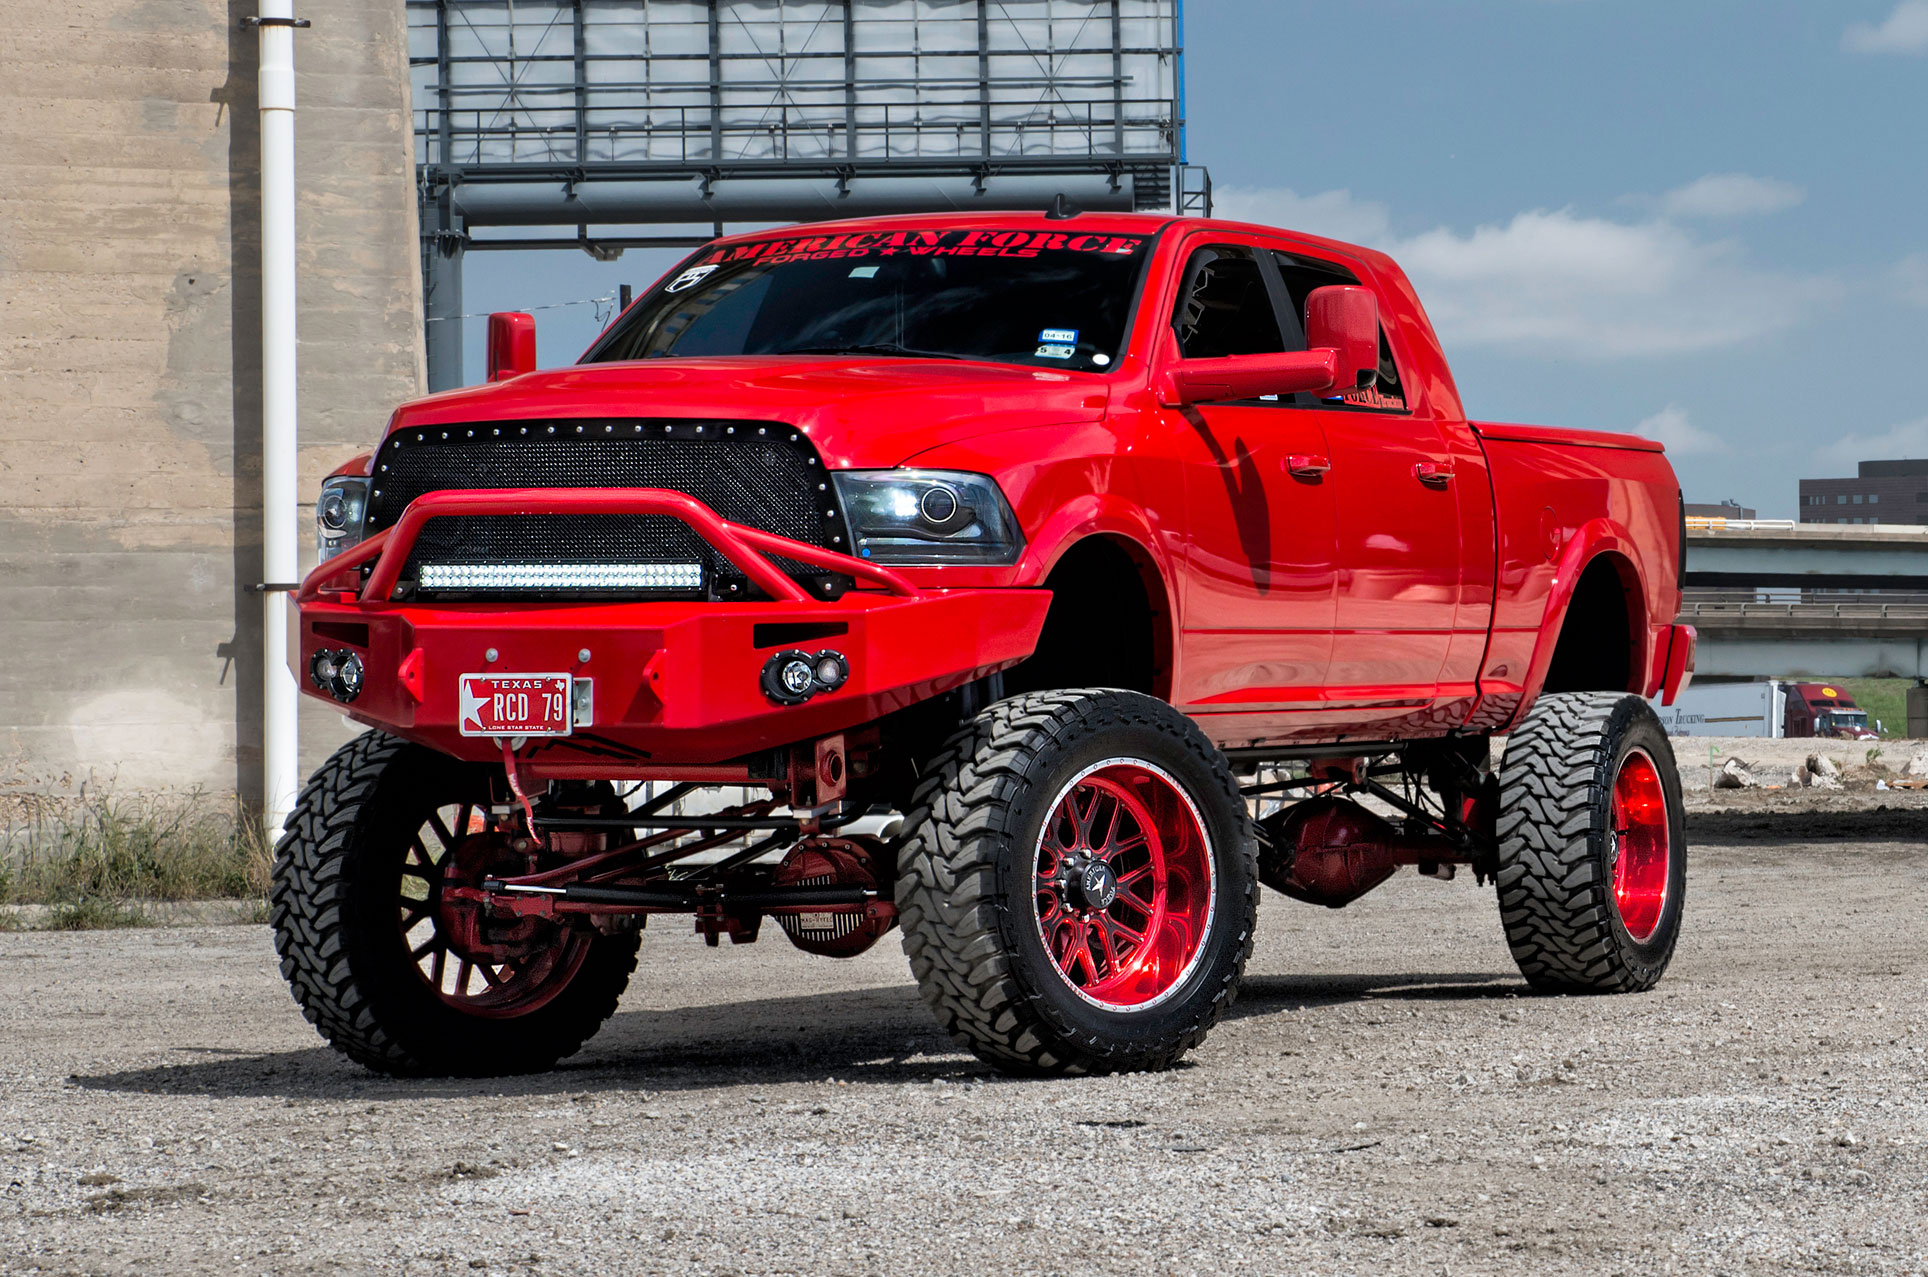 17 Incredibly Cool Red Trucks You\u002639;d Love to Own Photos